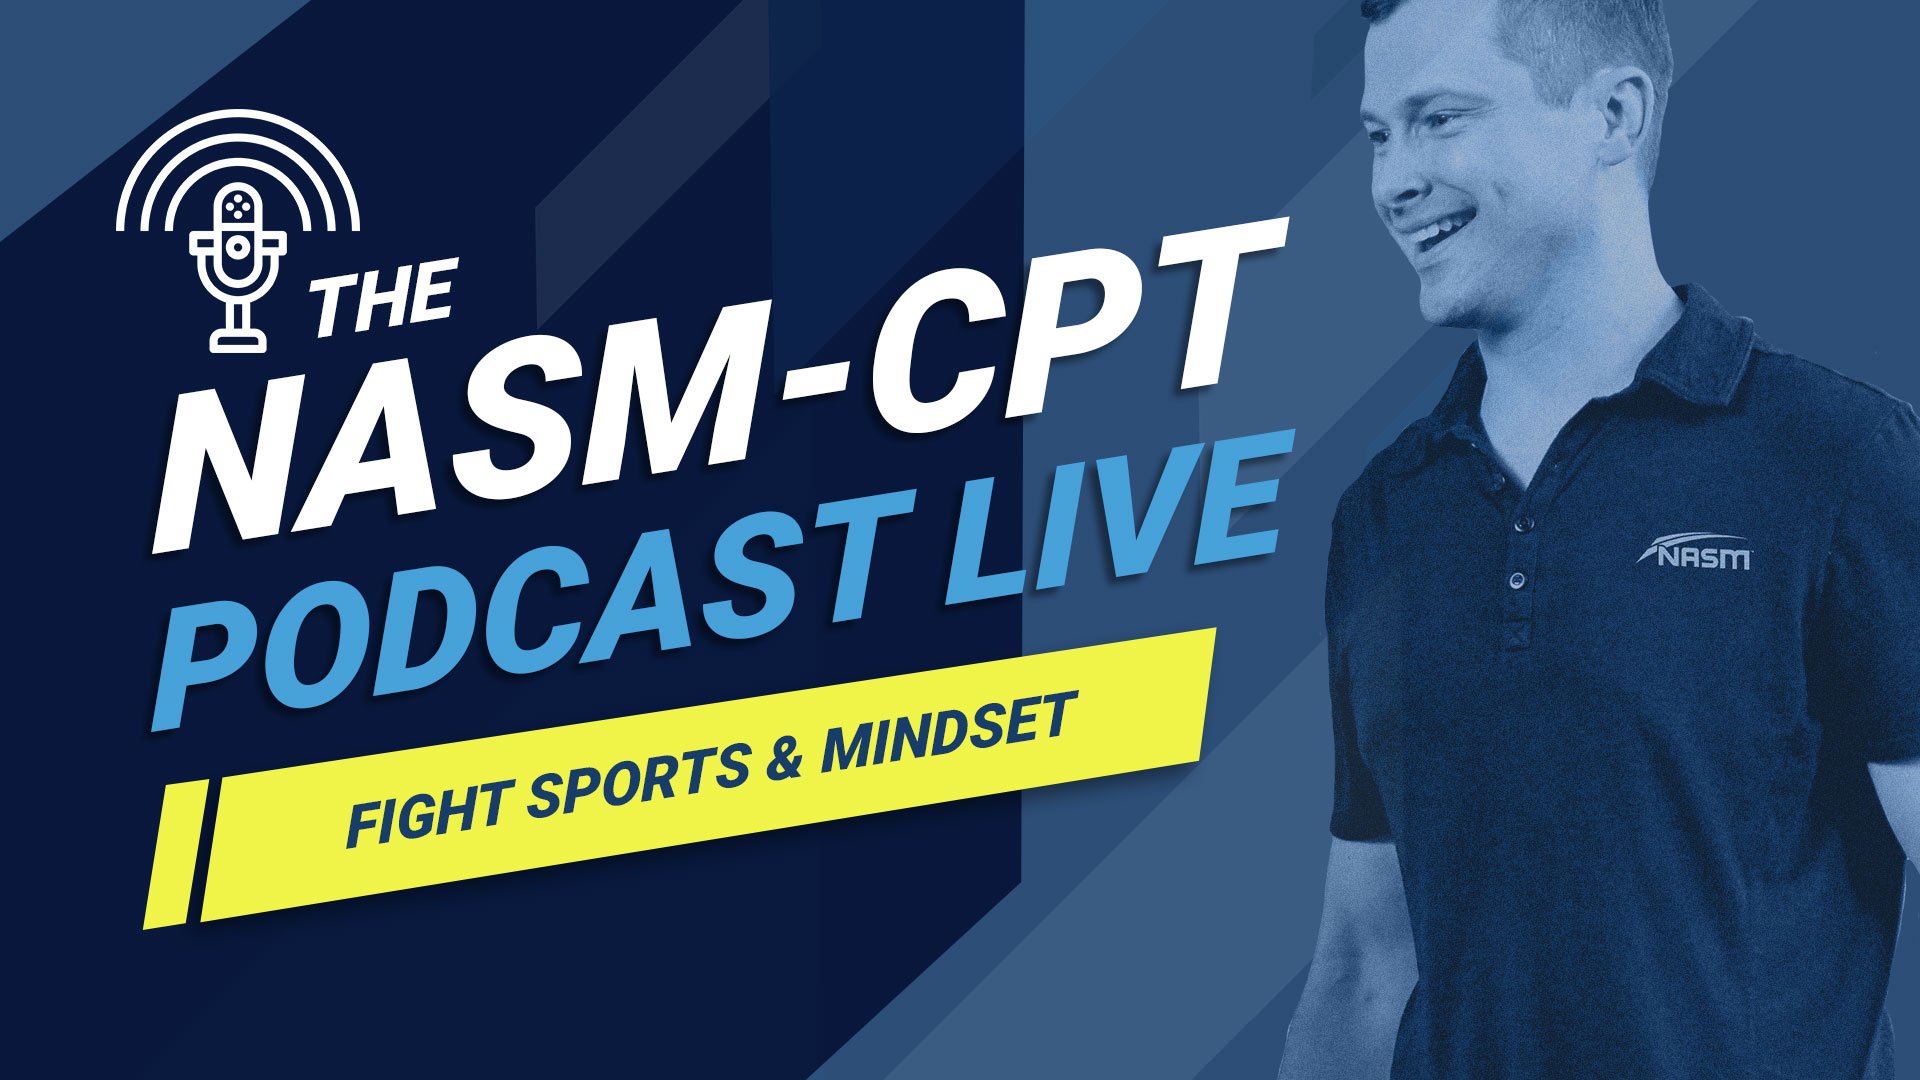 fight sports episode banner for Clenbuterolfr CPT podcast